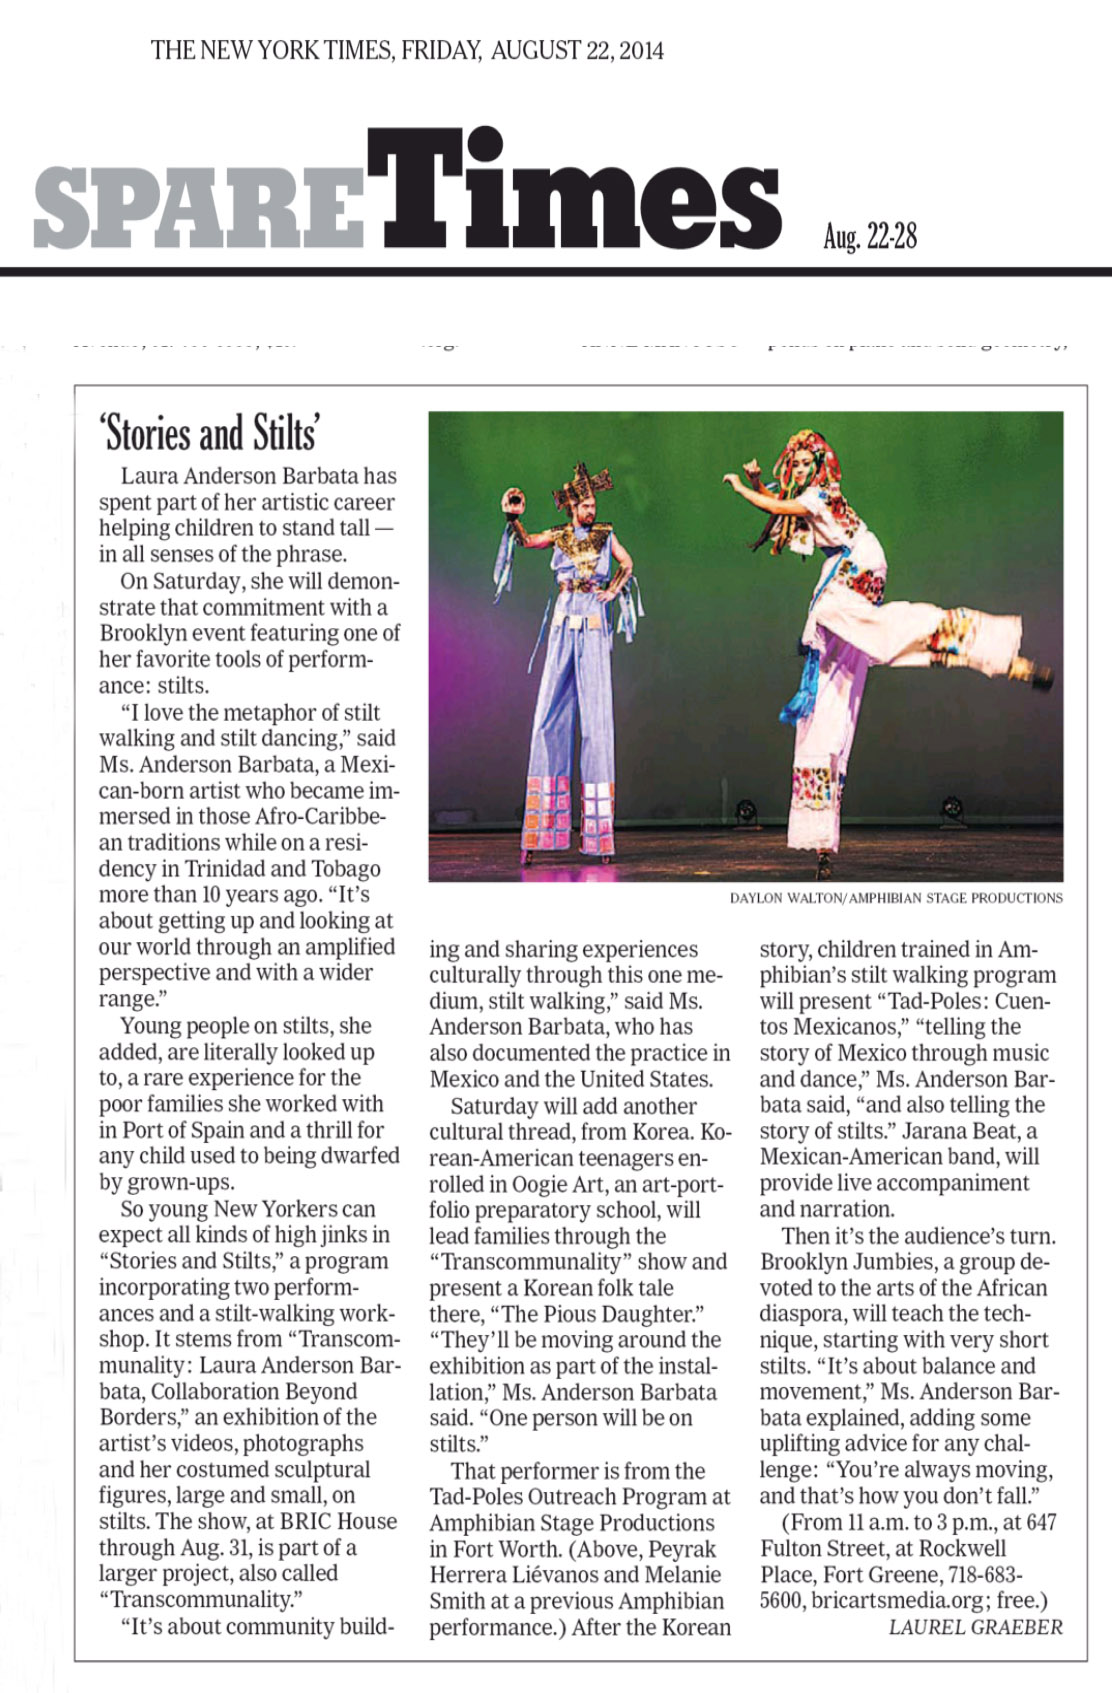 NY Times 2014 stilts and stories.jpg